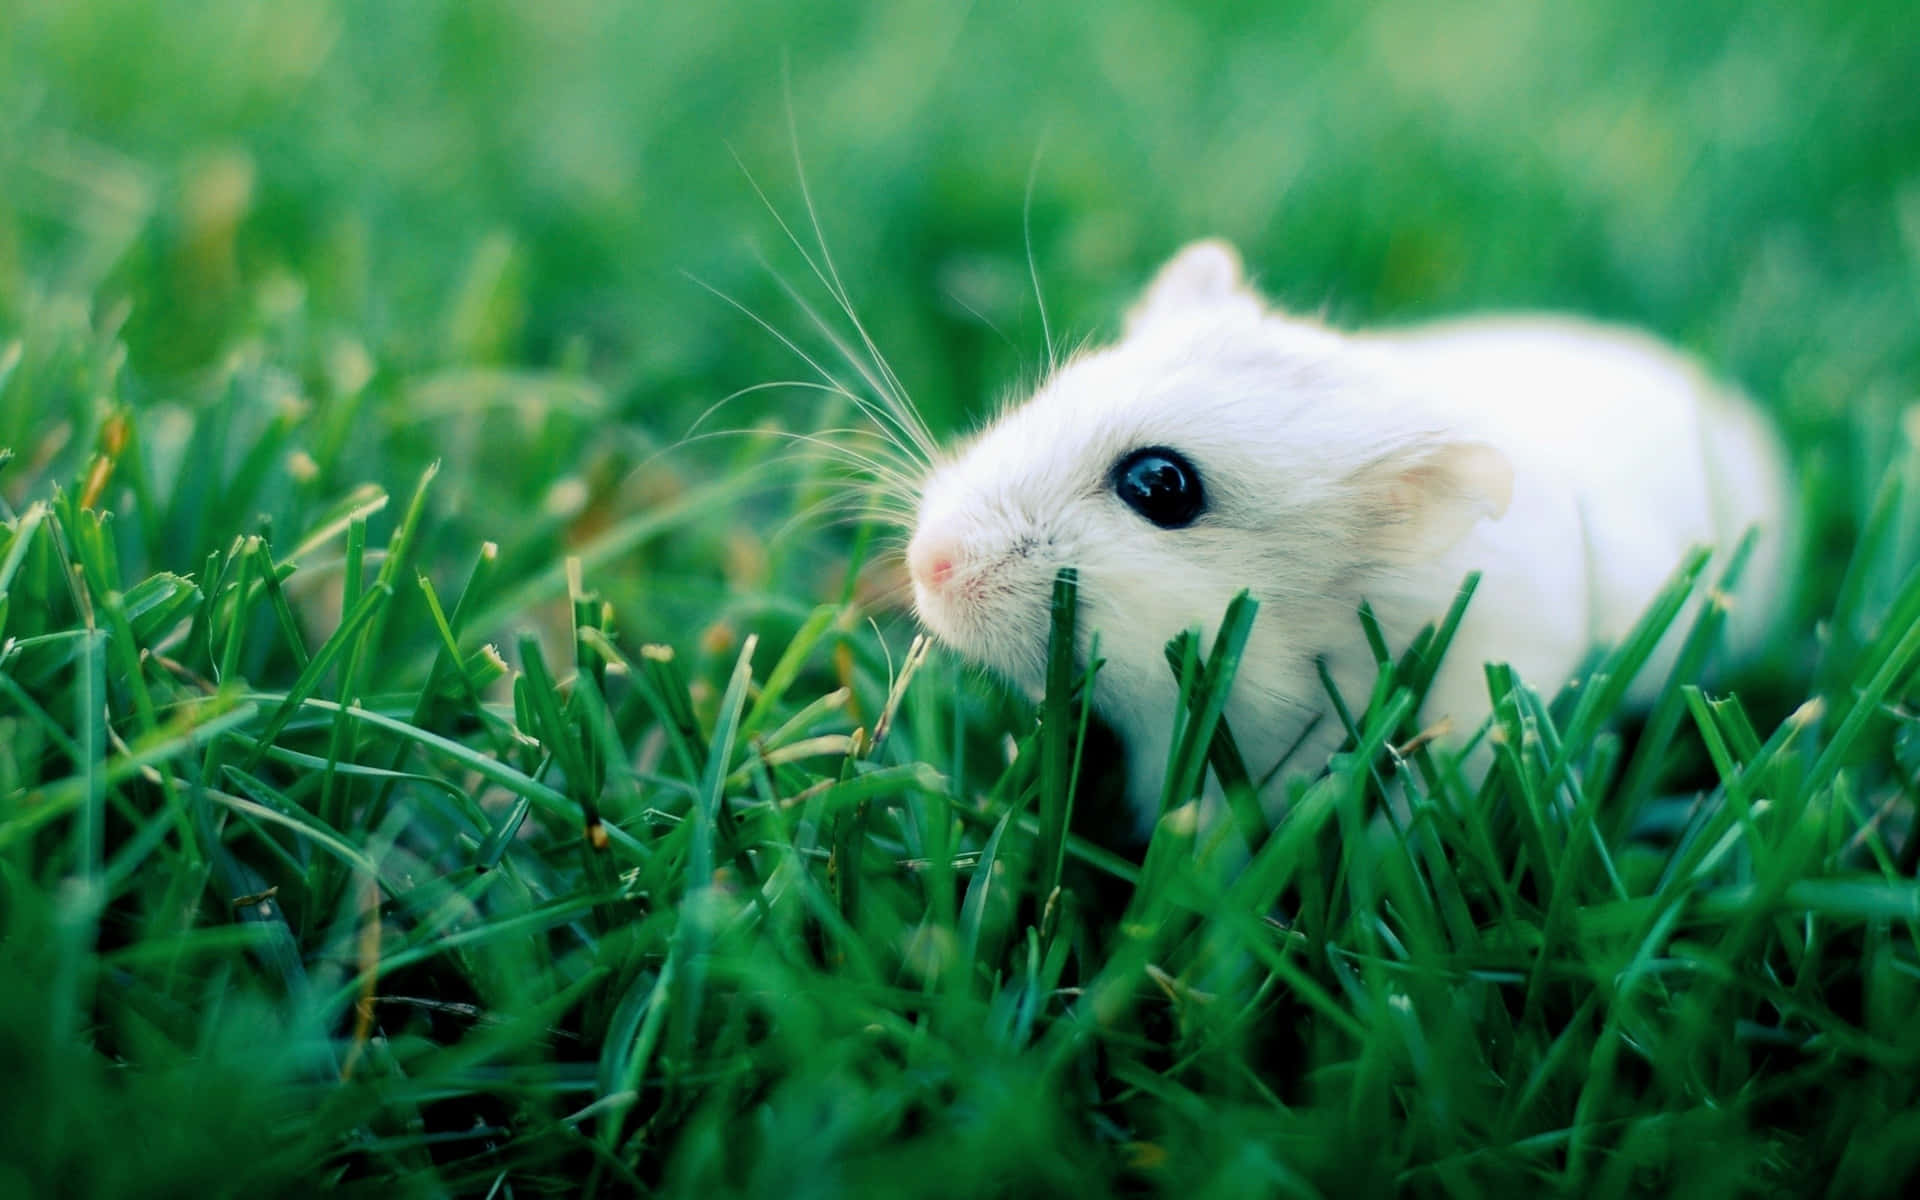 A White Hamster Is Sitting In The Grass Background